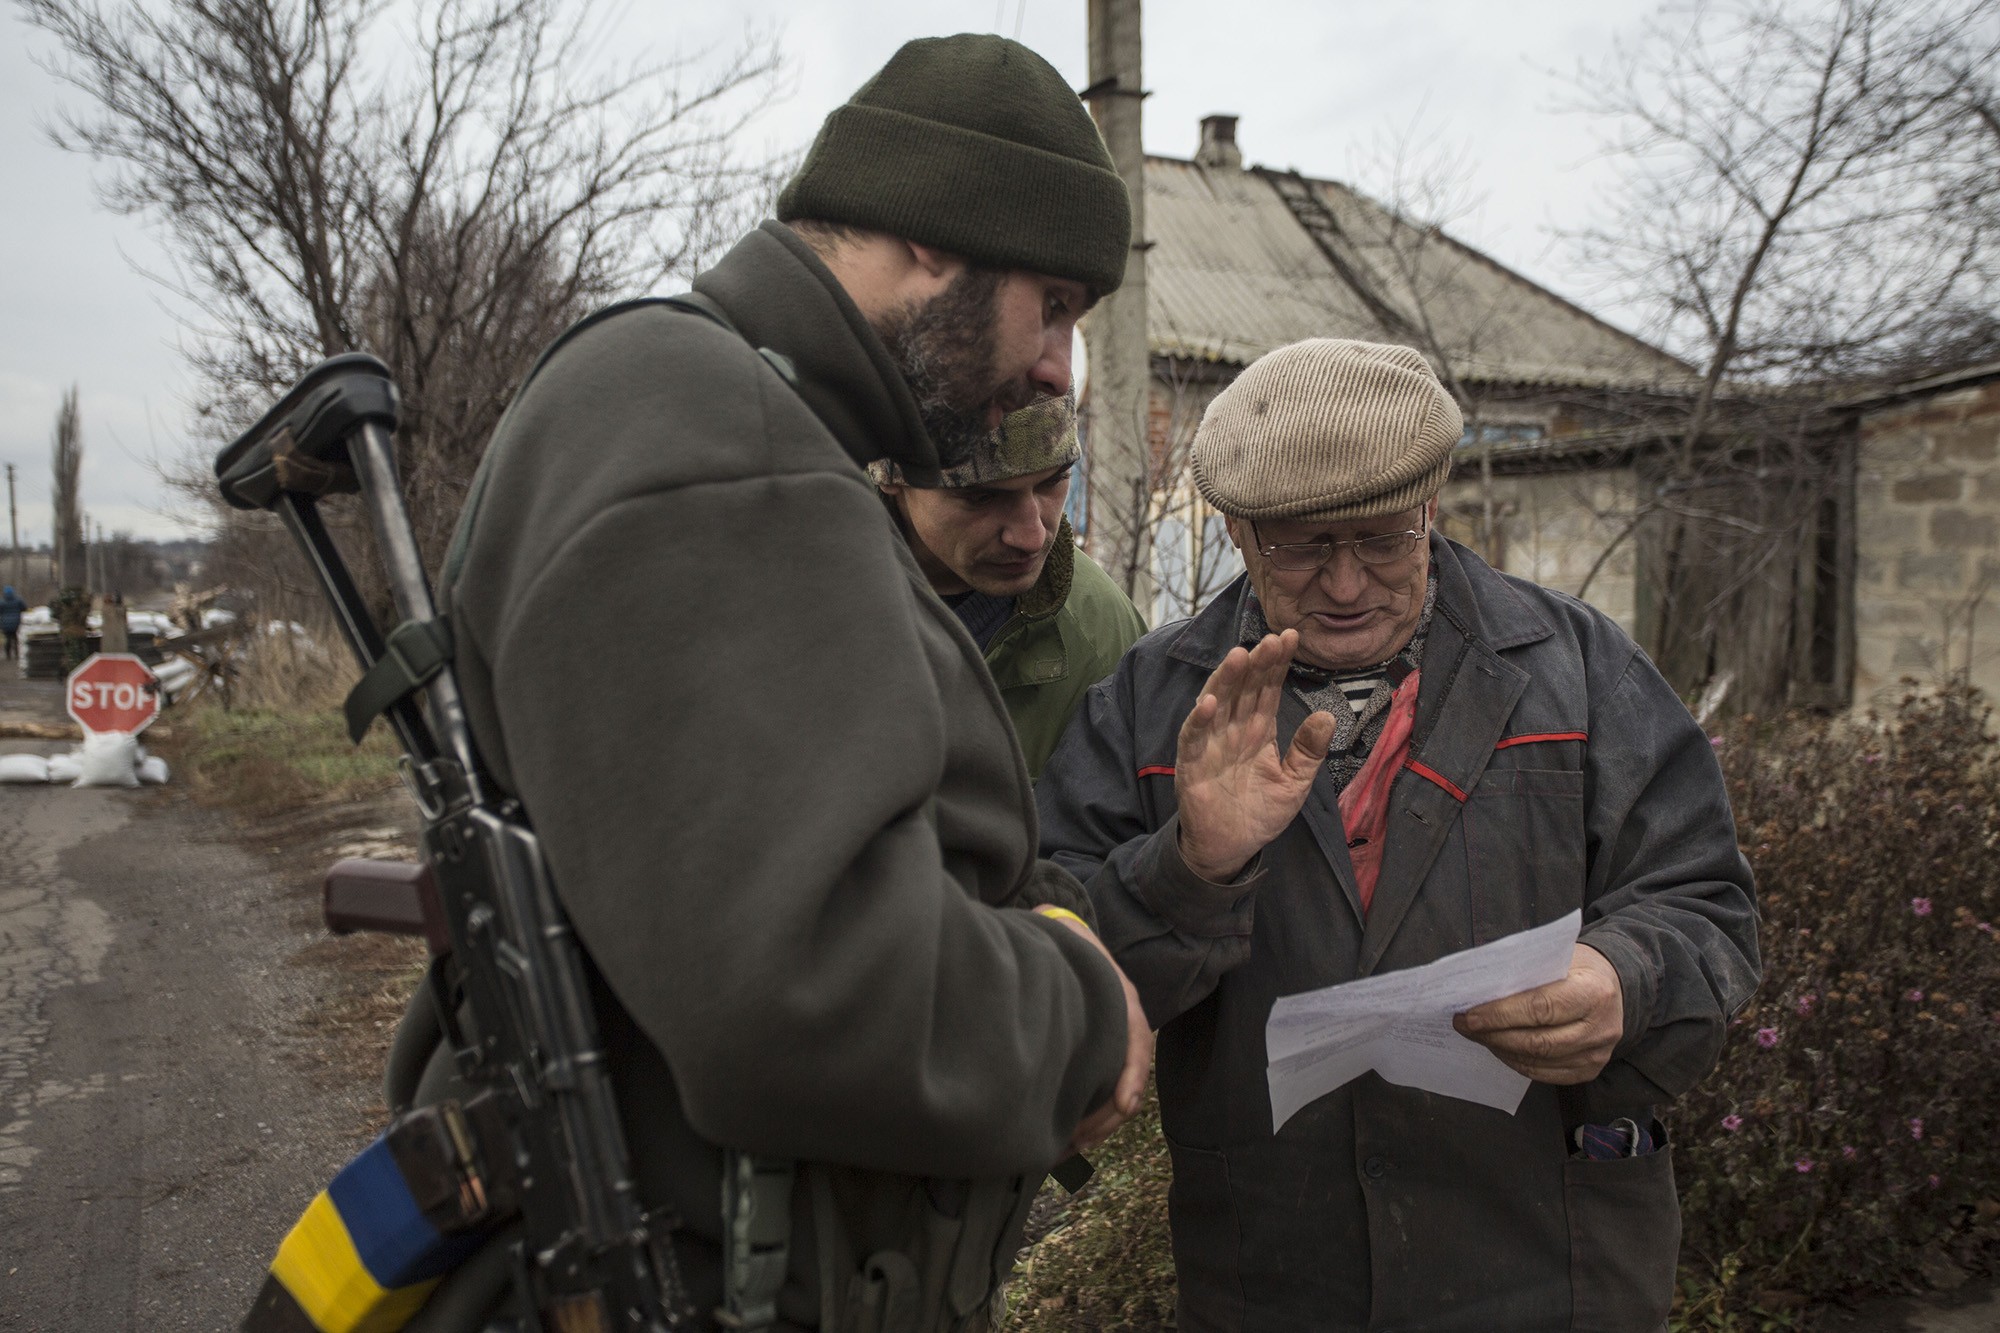 Ukrainian soldiers speak with a local resident on Nov. 29 in Verkhniotoretske, a government-held village in the Donetsk Oblast located a short distance away from territory occupied by Russian-backed militants. A new report from non-governmental organization Center for Civilians in Conflict says Ukraine must do more to address humanitarian challenges in the warzone in order to &#8220;build trust with disenfranchised civilians.&#8221;